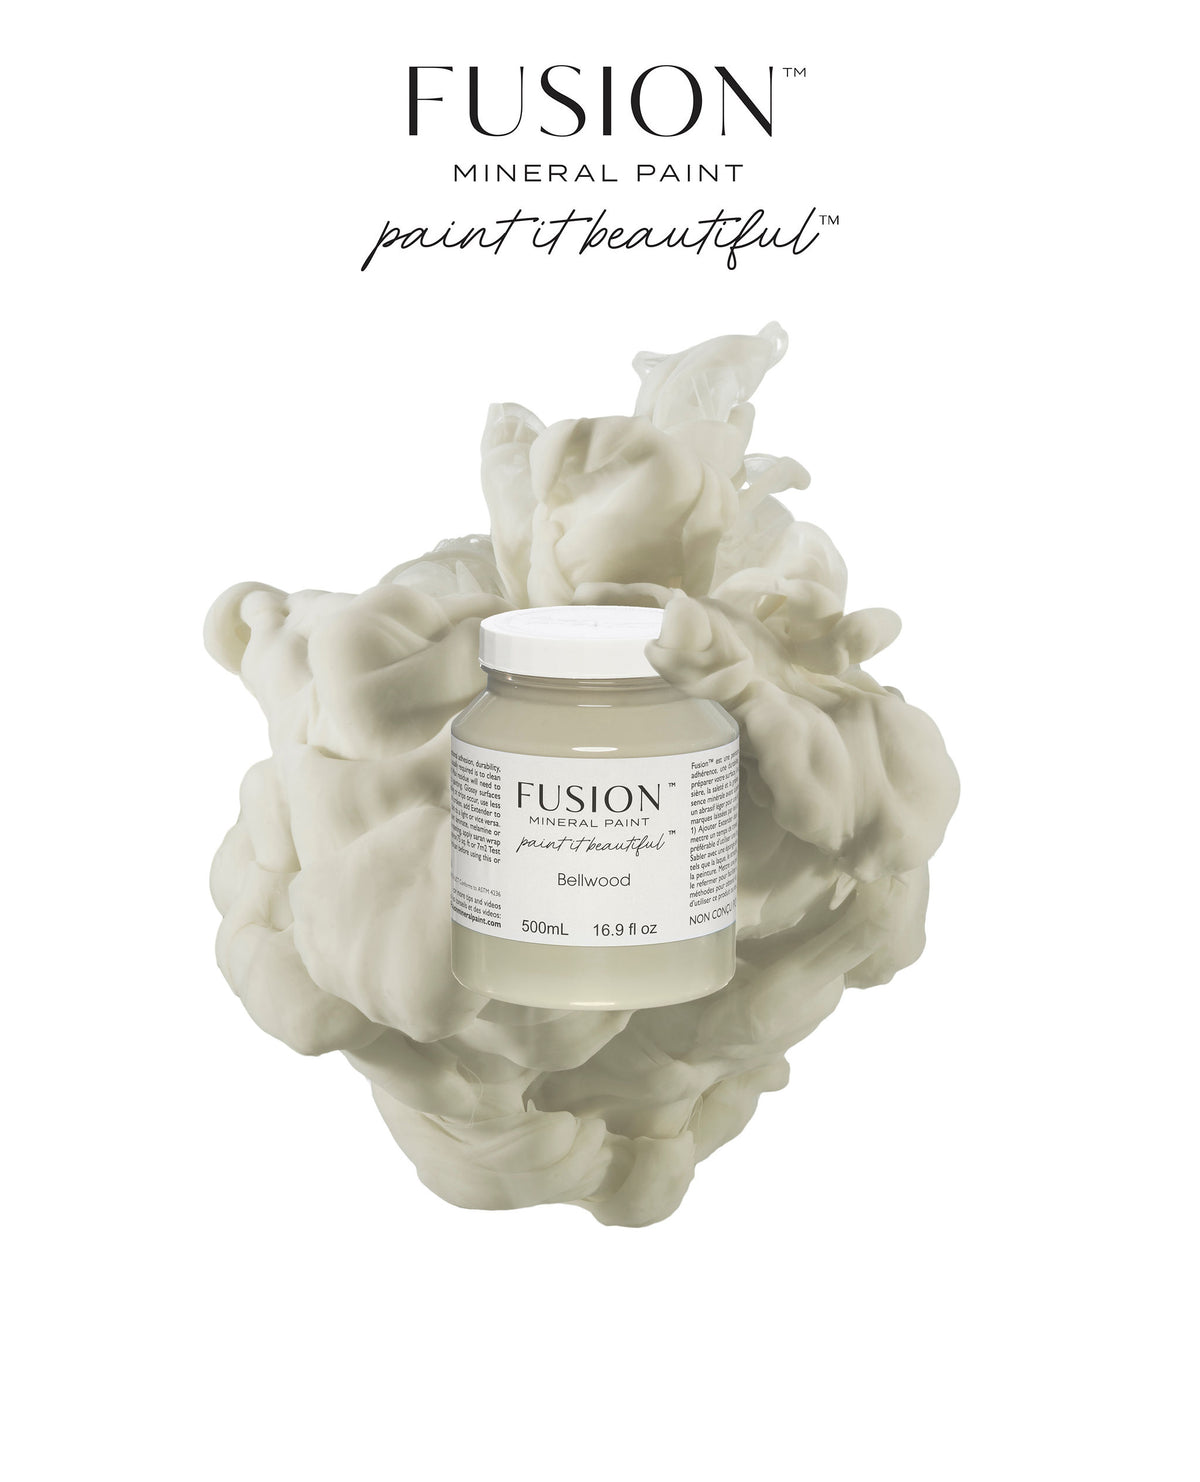 Bellwood-Fusion Mineral Paint